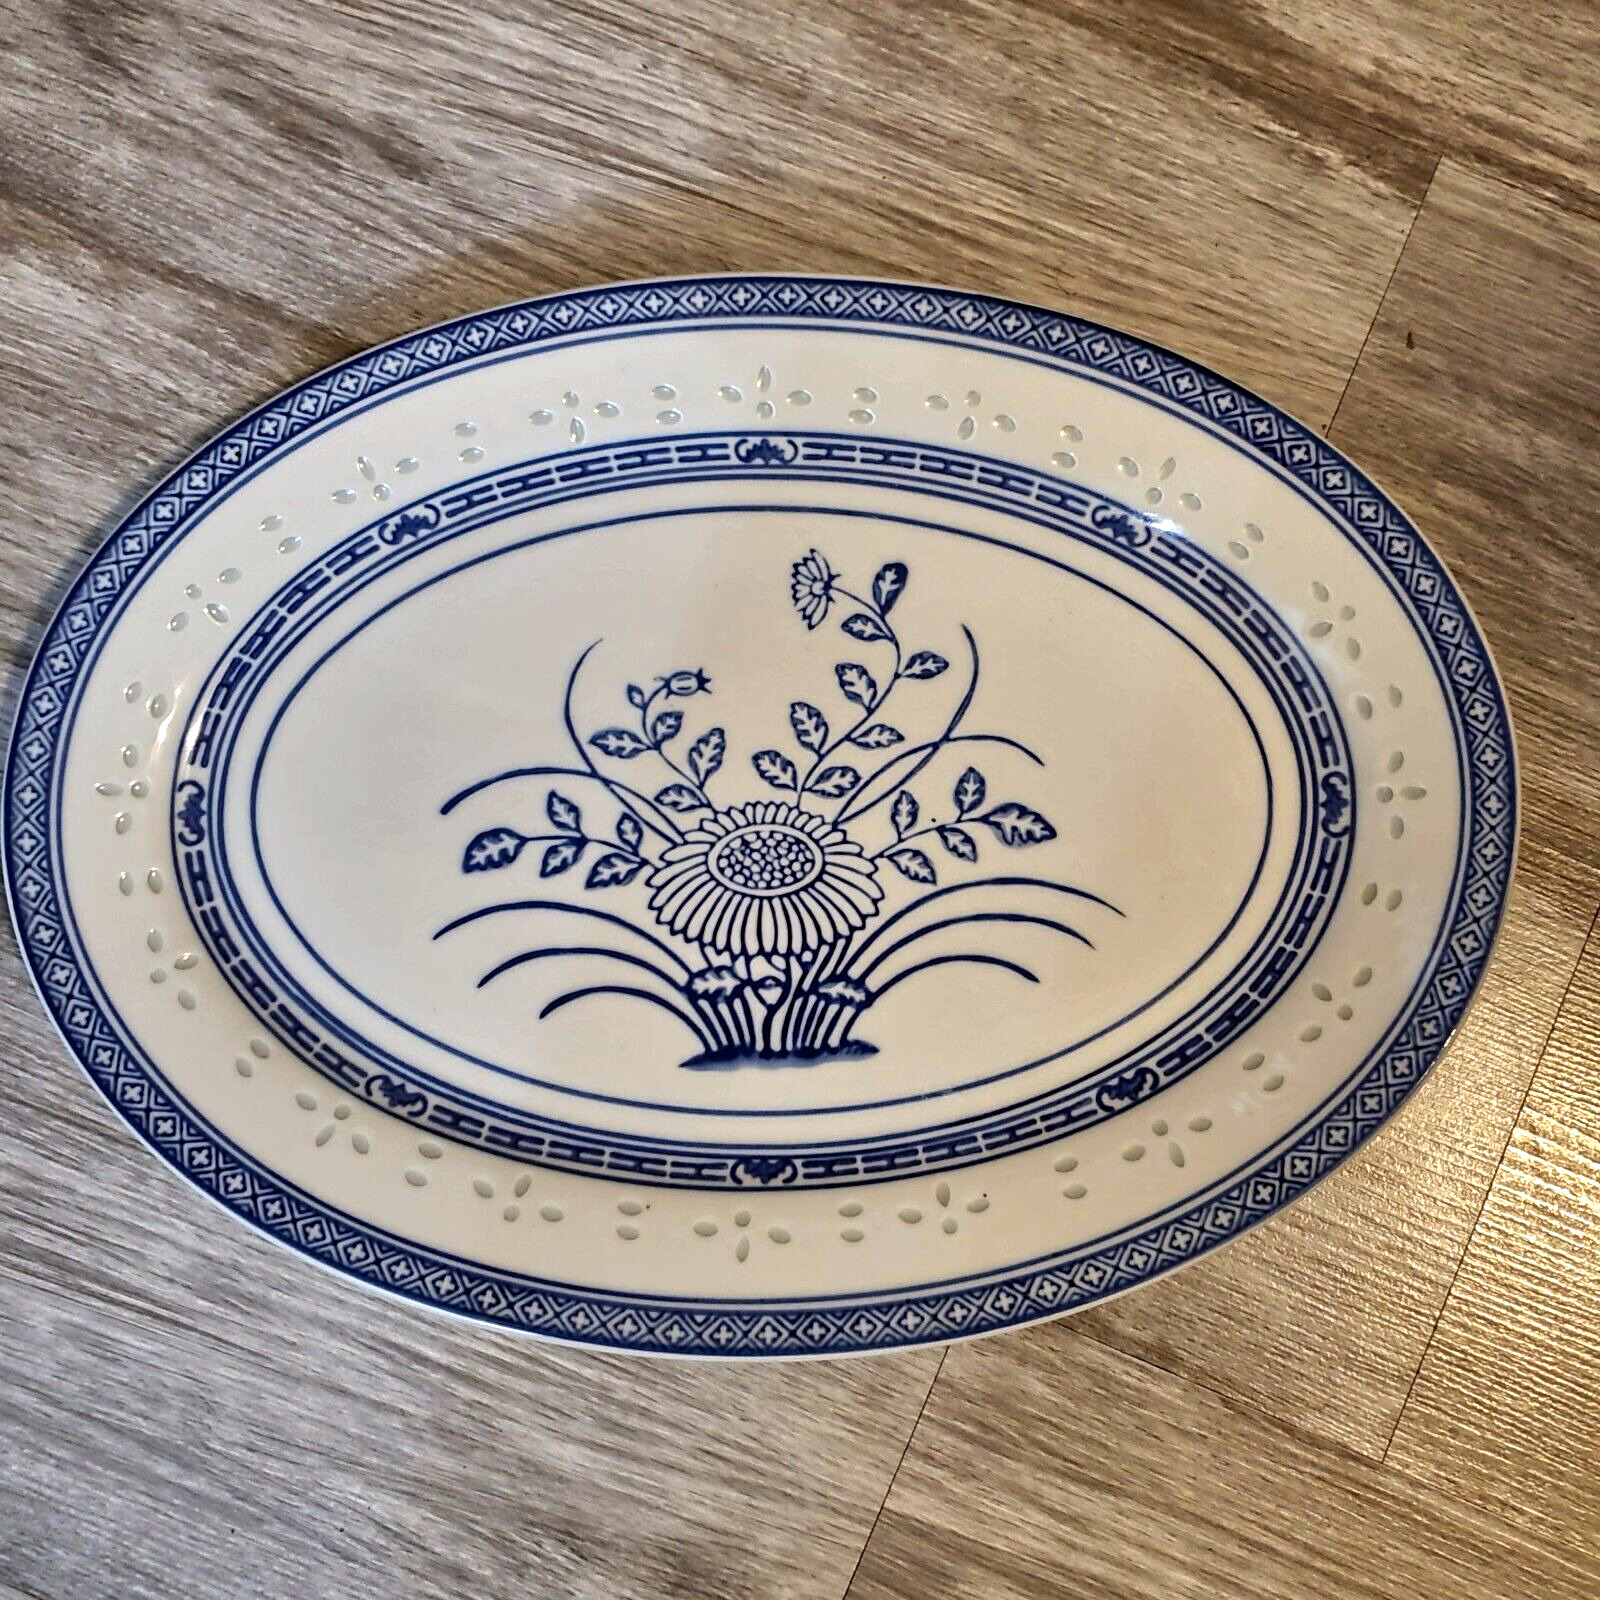 Vintage 1960s Chinese White and Blue Porcelain Rice Flower Oval Plater